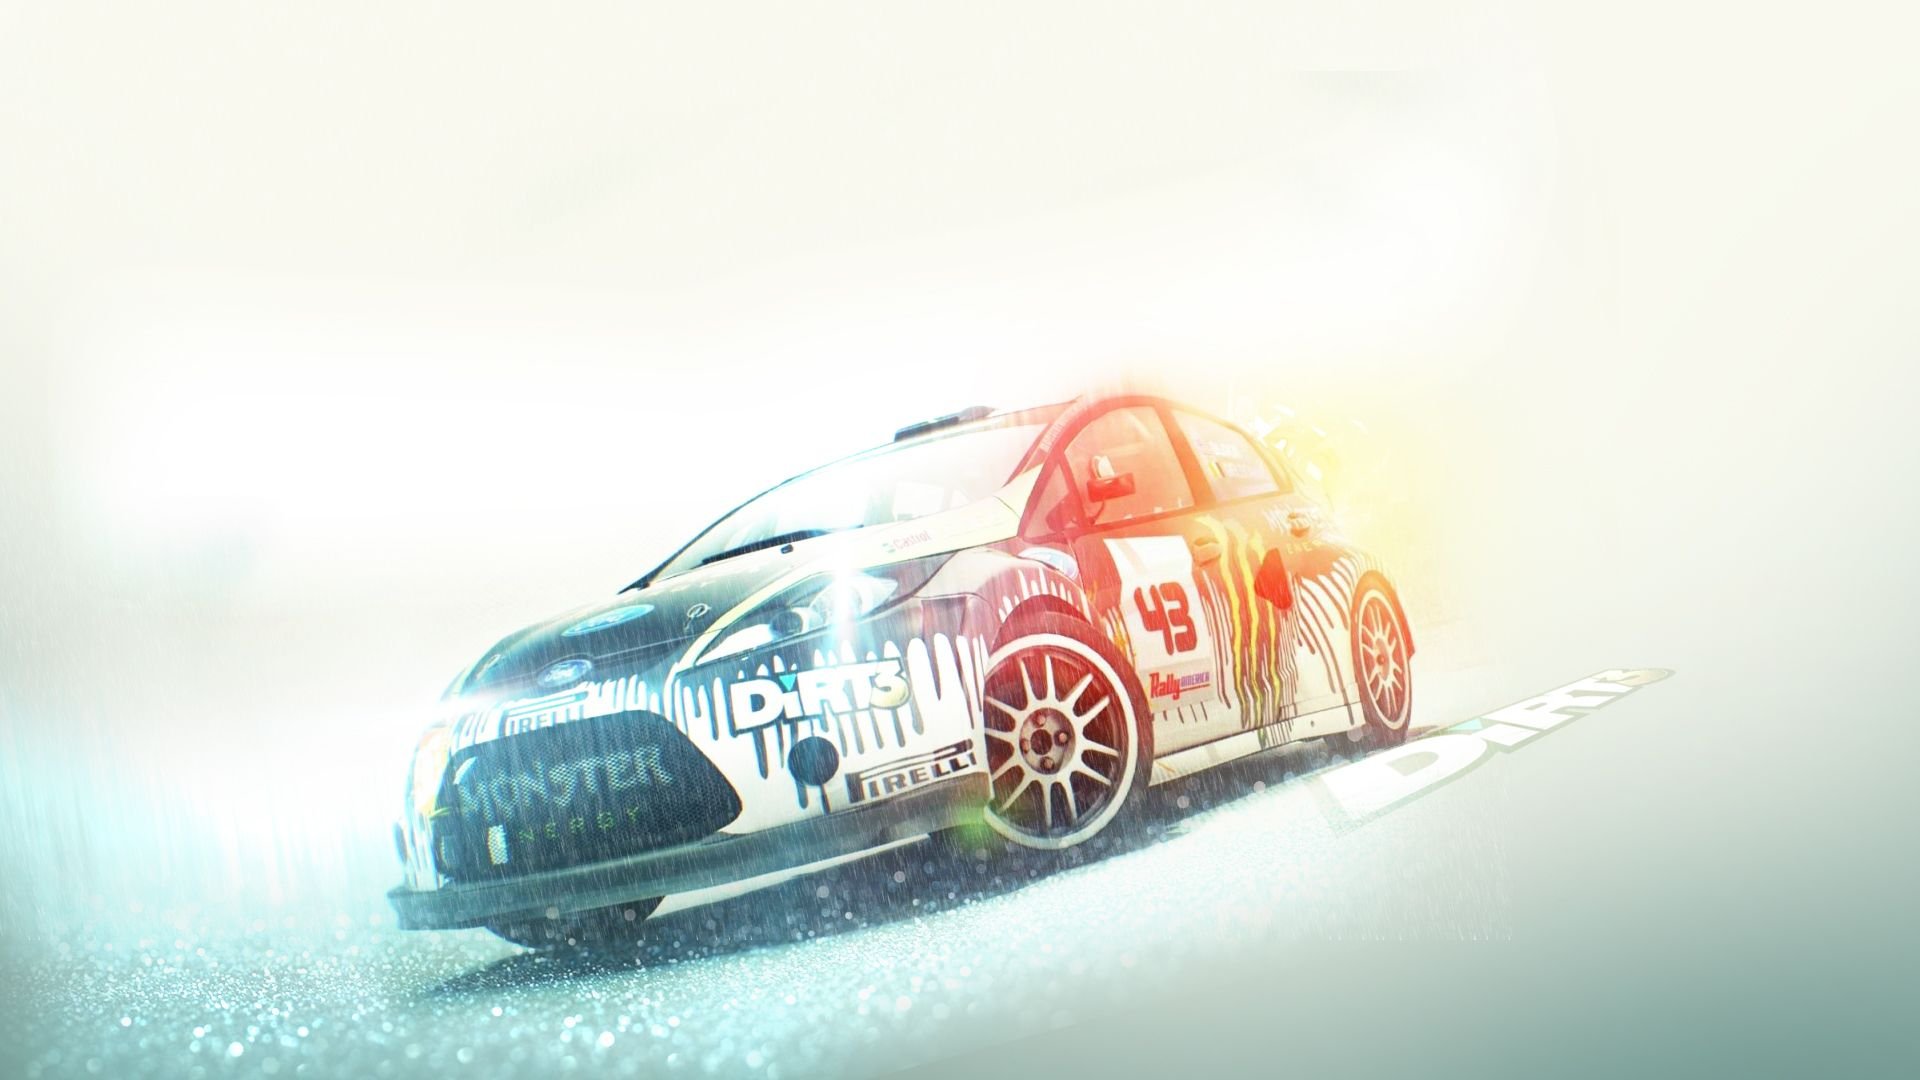 android dirt 3 background